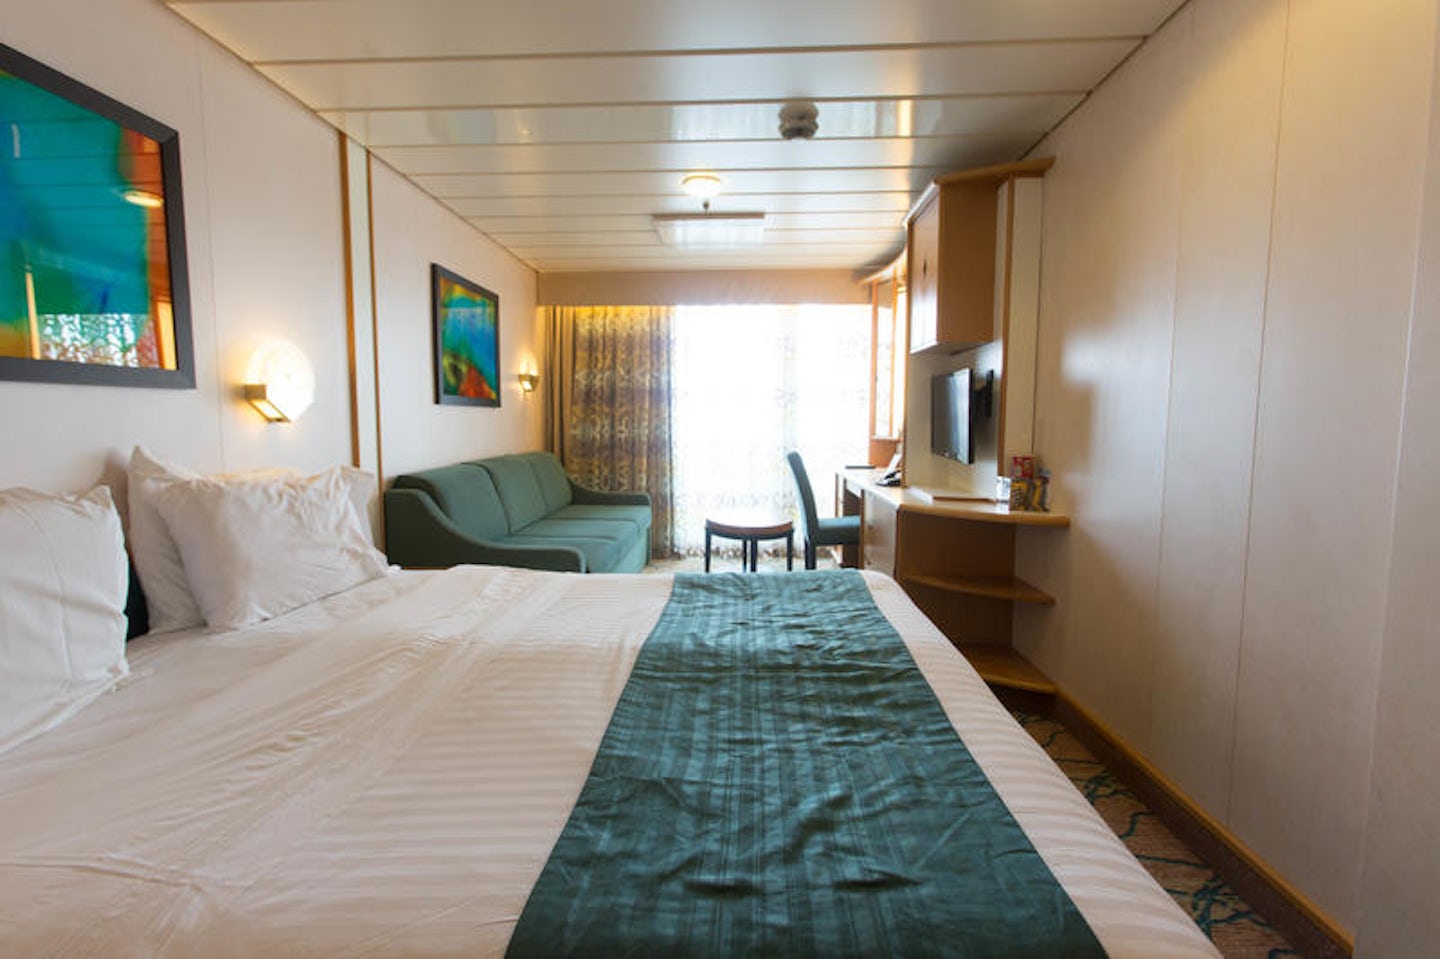 The Balcony Cabin on Enchantment of the Seas